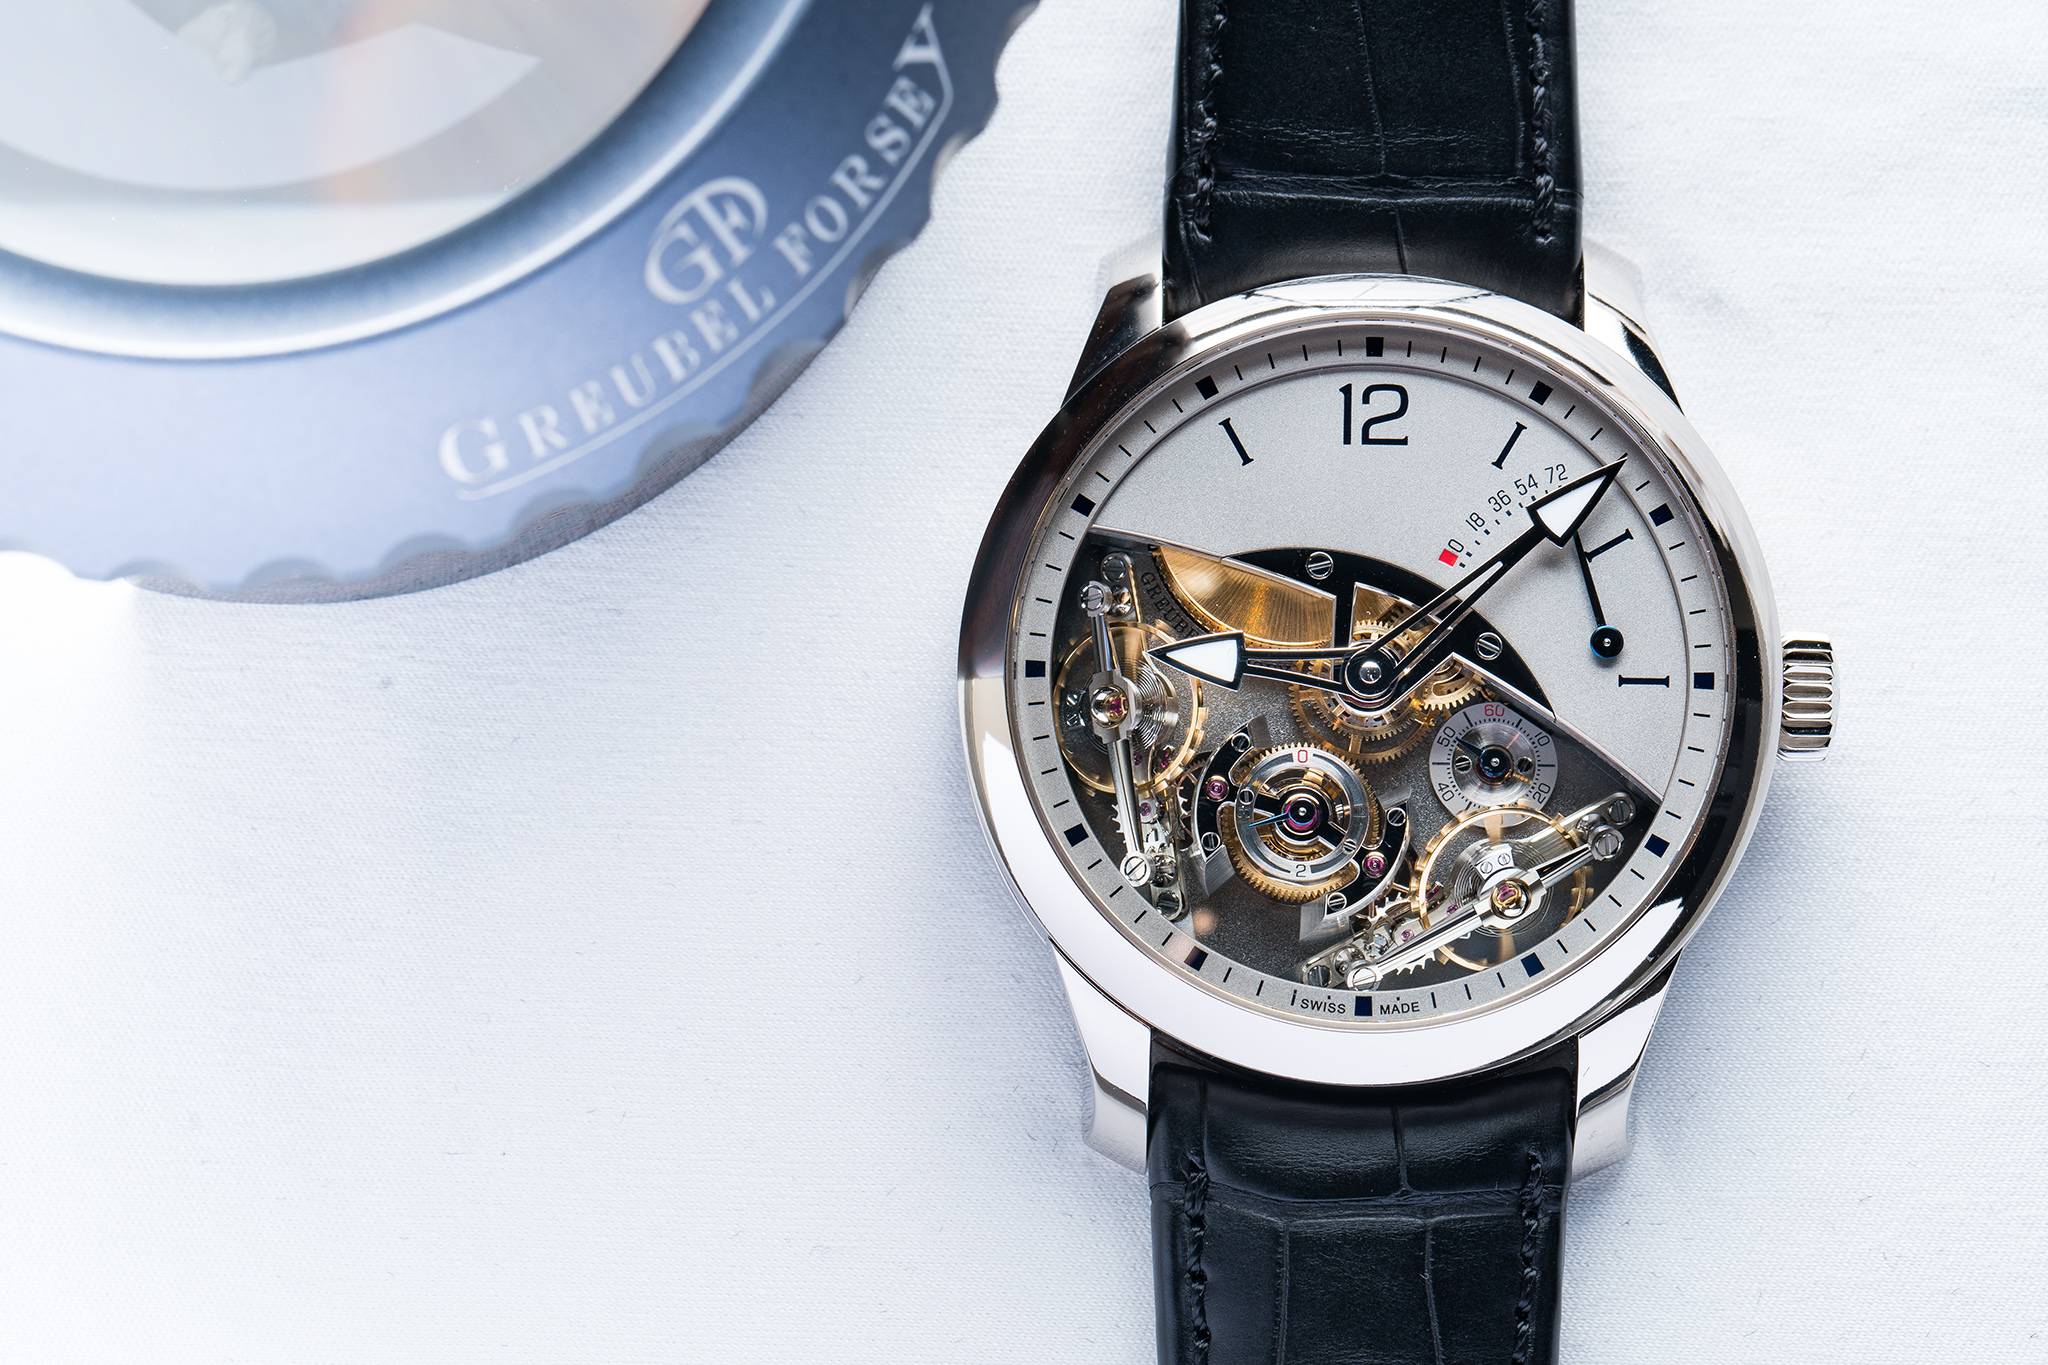 SIHH 2016 Novelties From Greubel Forsey